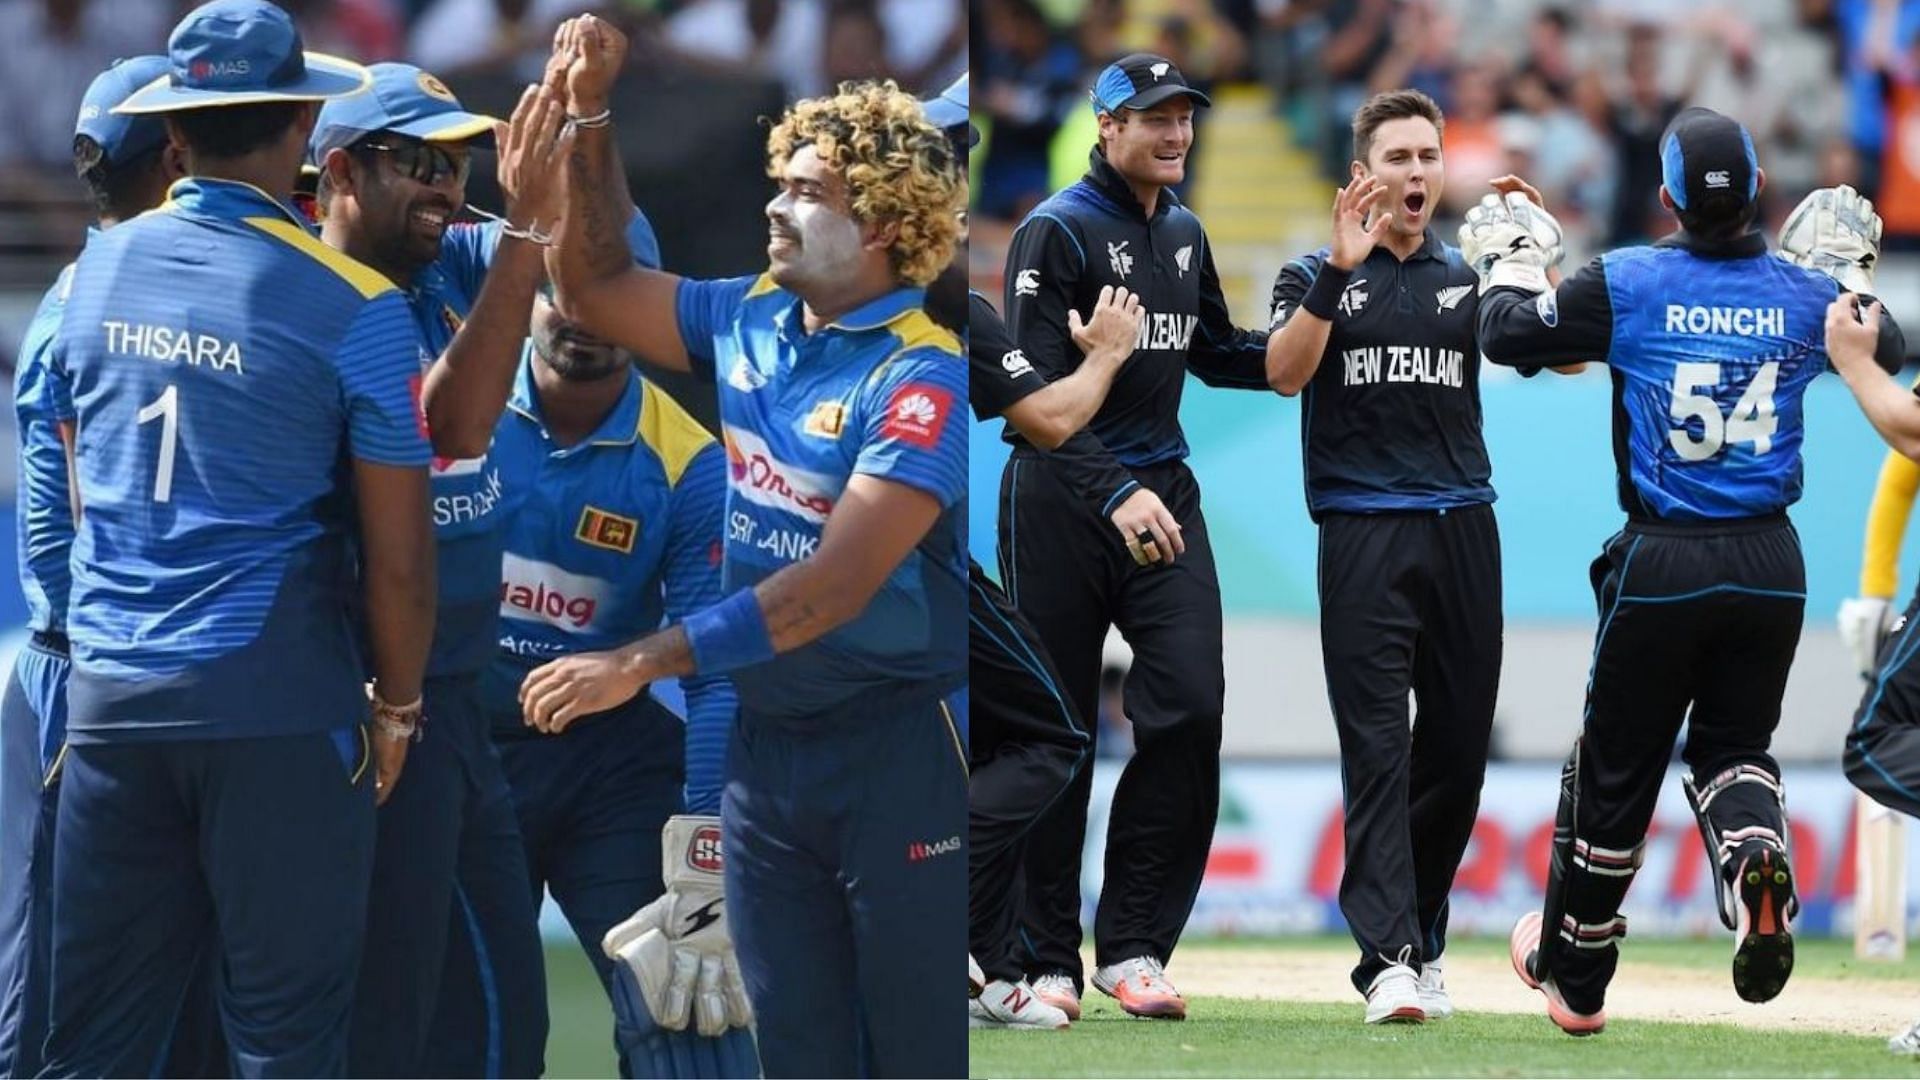 Nz vs SL World Cup 2019 Live Cricket Score Streaming Online, NZ vs SL Playing 11, Dream11 Team,Players,Live Match Score Online on Jio,Hotstar,DD and Star Sports